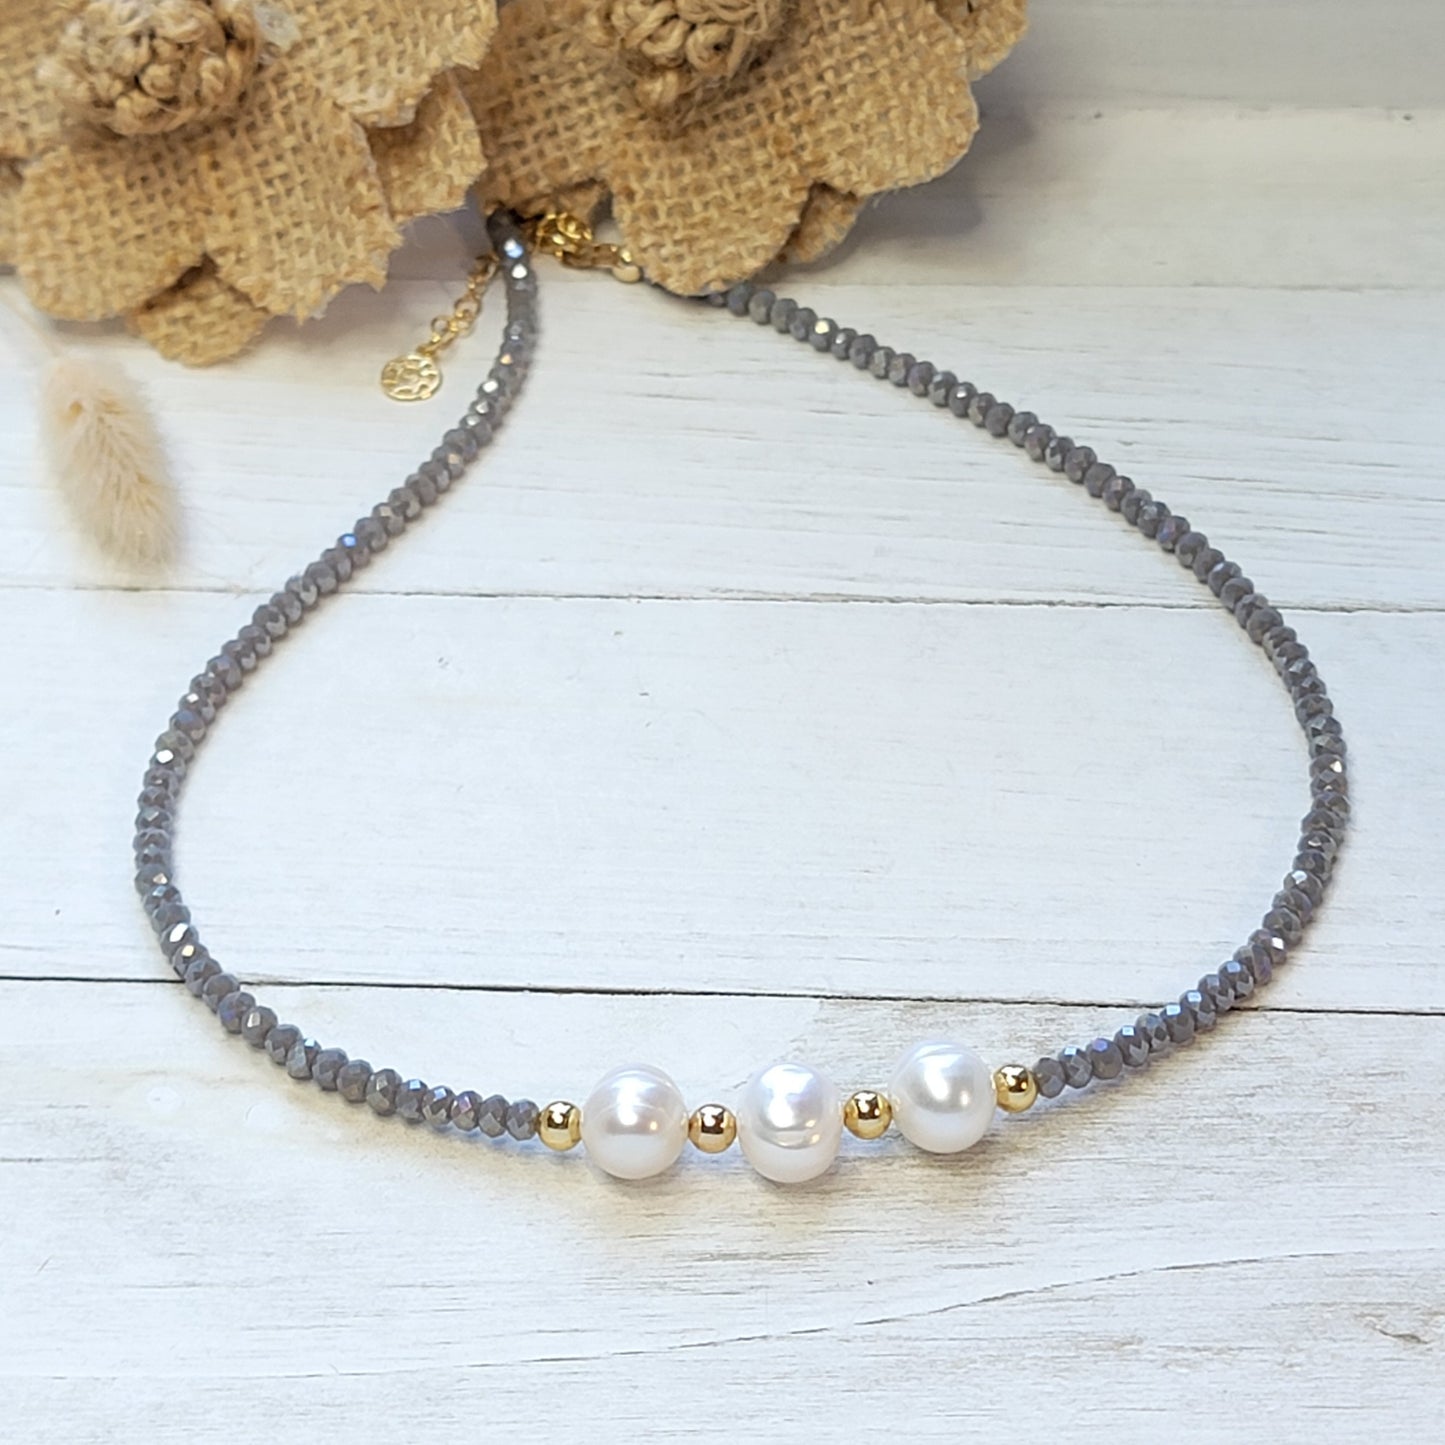 Translucent Black or Gray Choker - Crystals and Freshwater Pearls